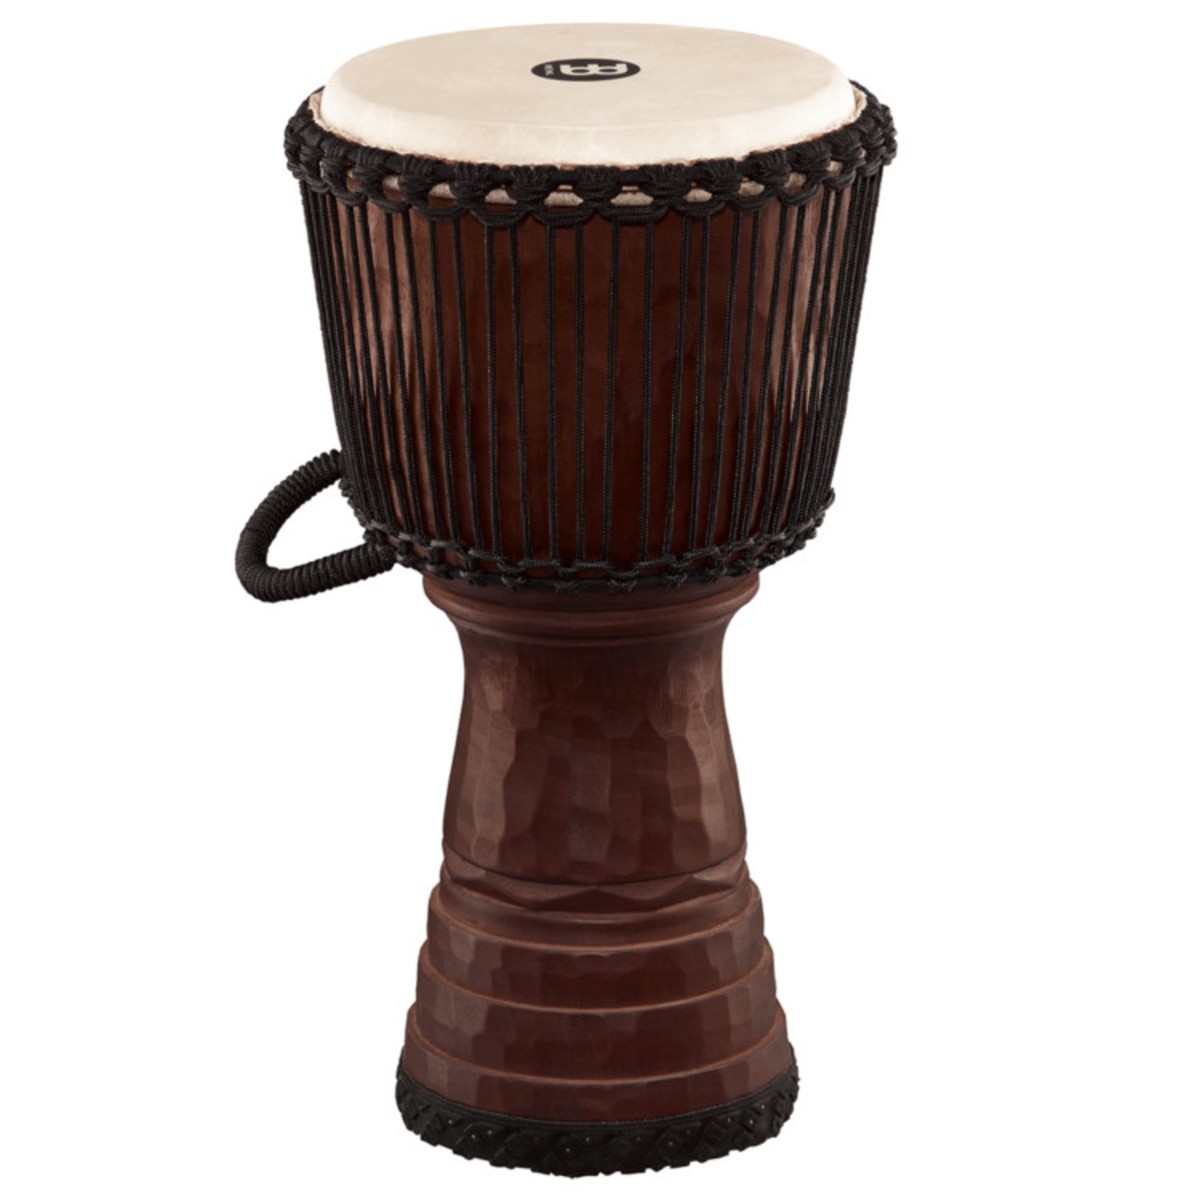 Meinl Percussion Tongo Carved Djembe, 12"